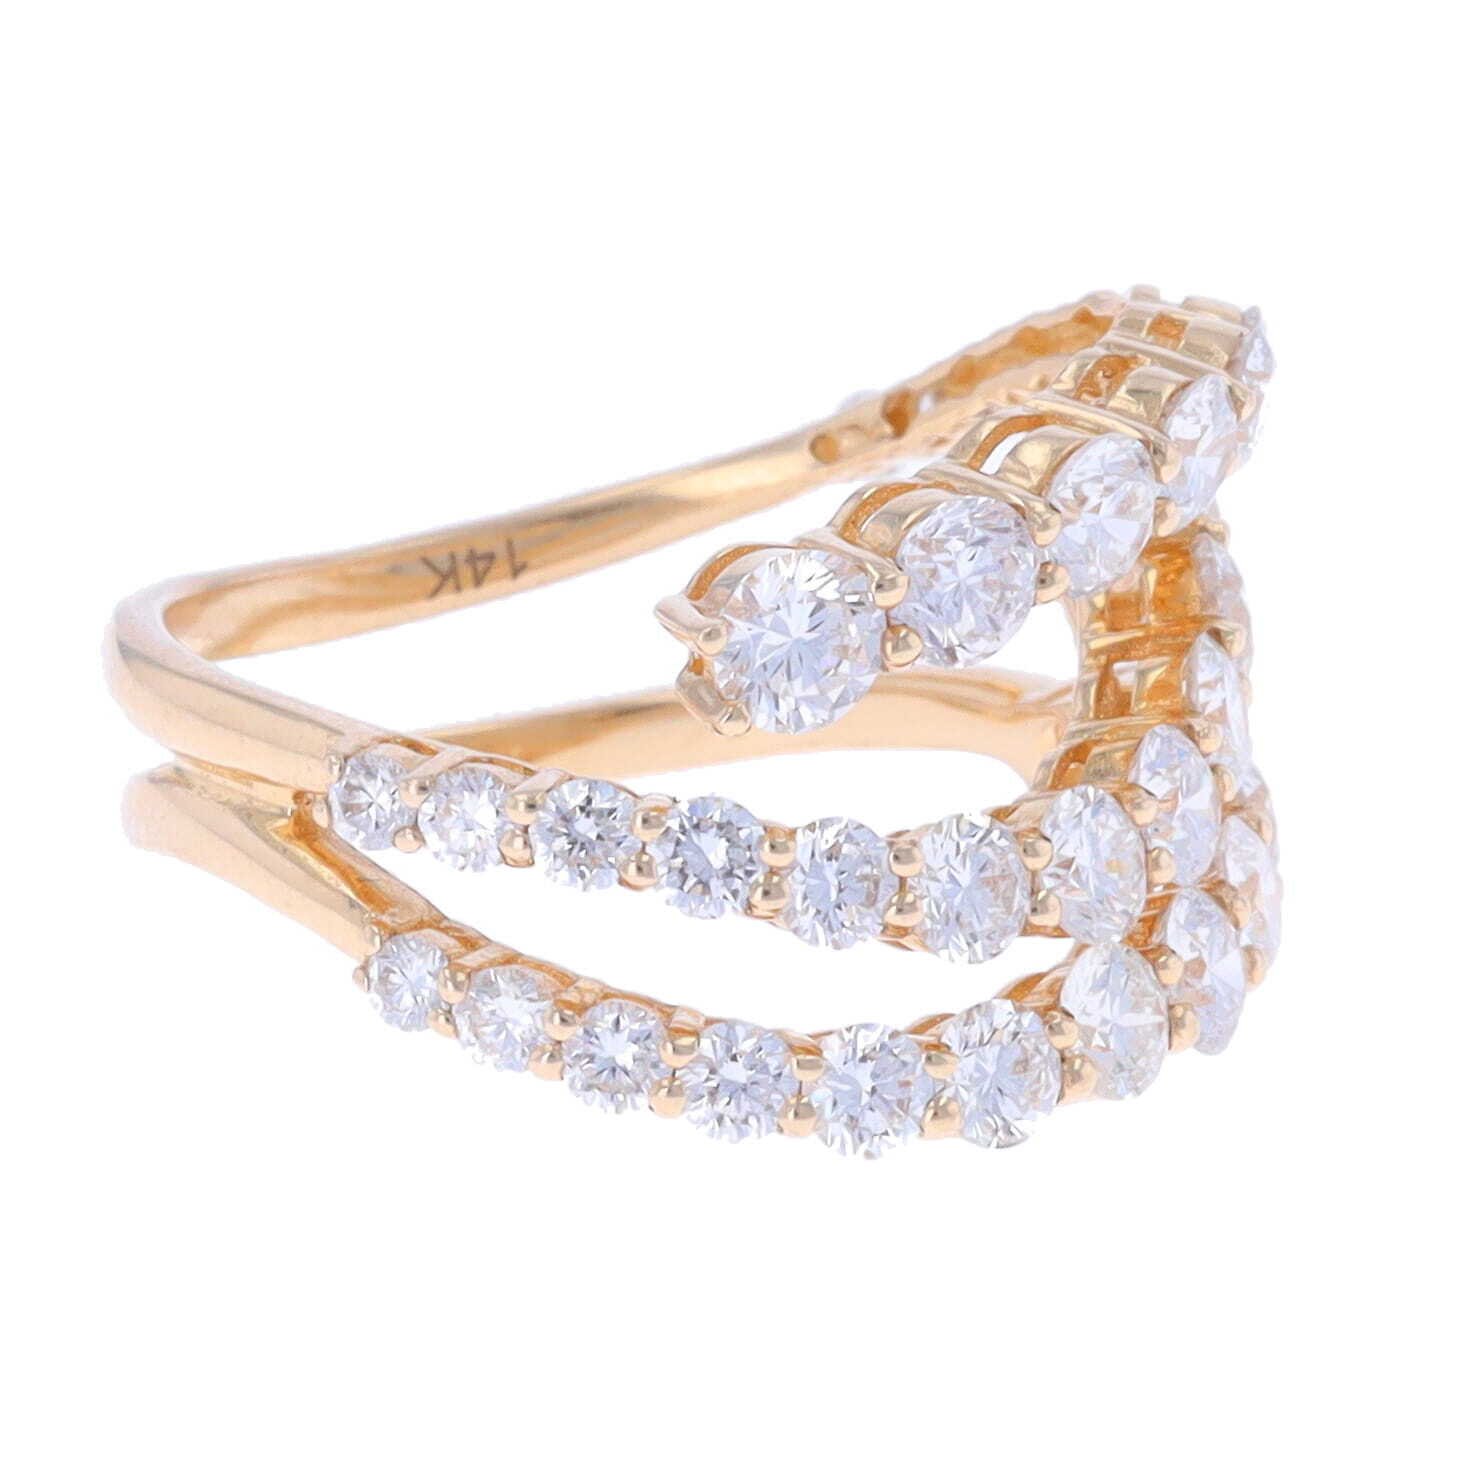 14k Large Curved Diamond Cocktail Ring